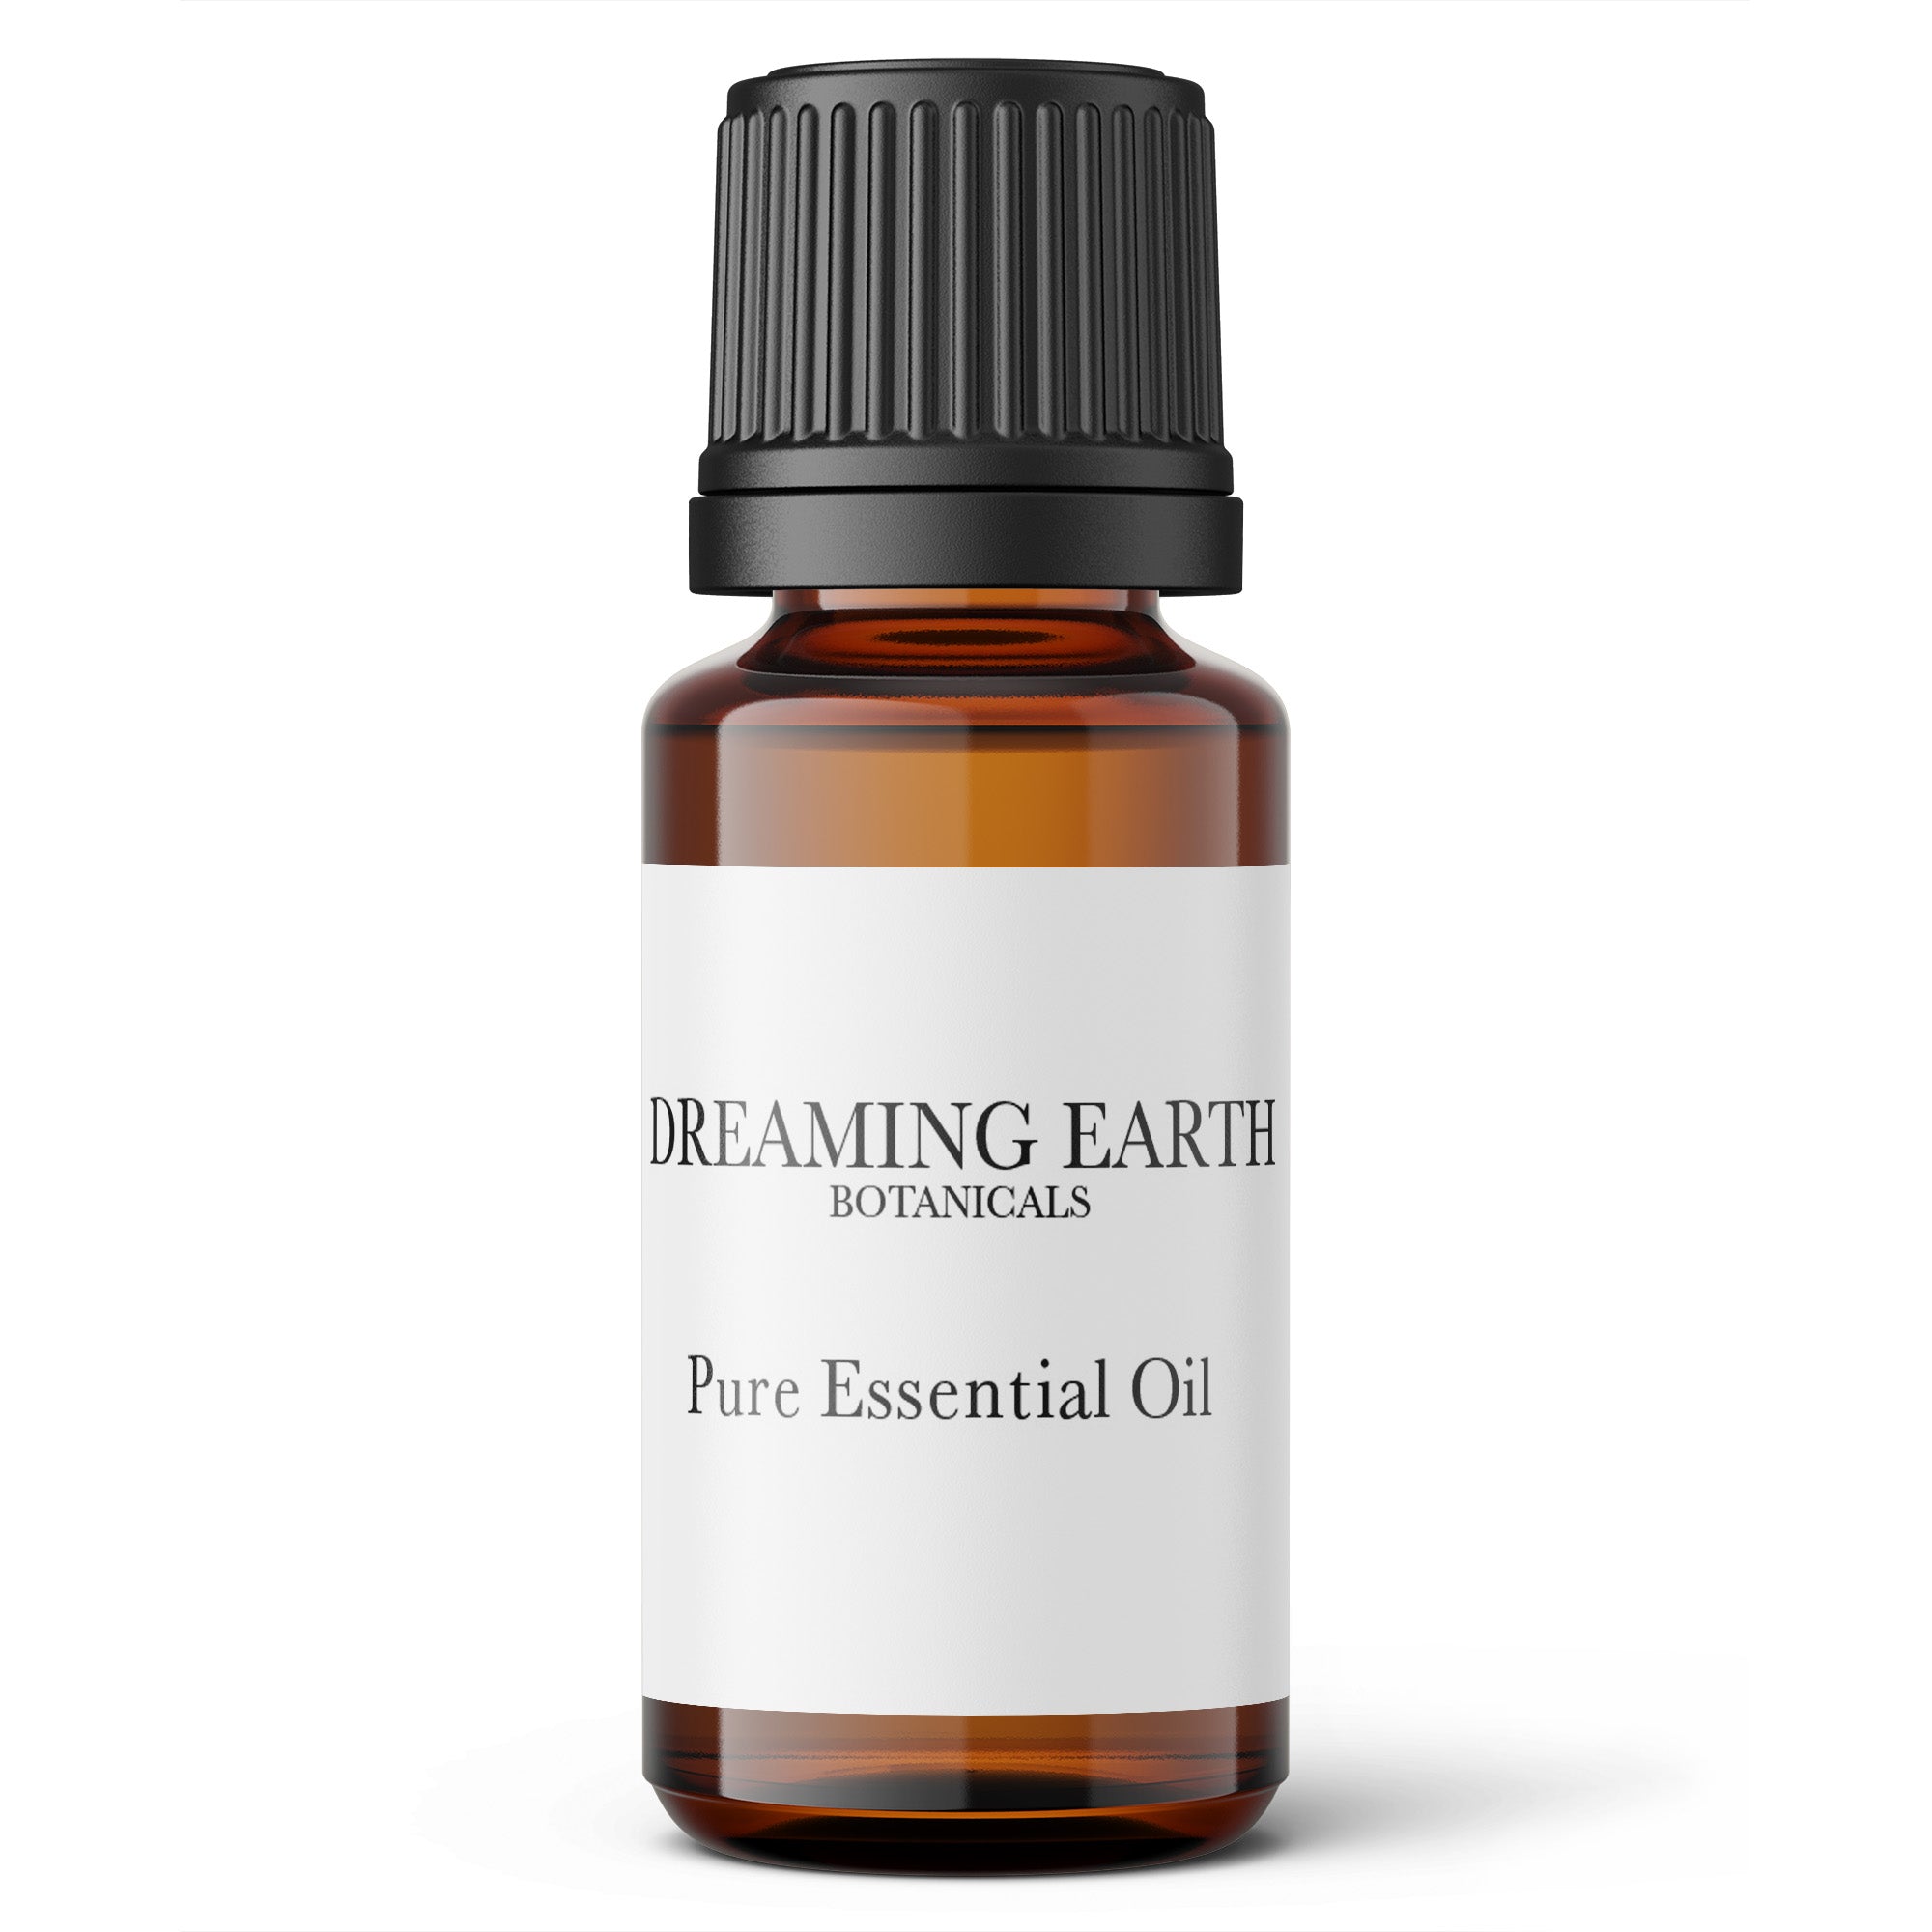 Load image into Gallery viewer, Neroli - 5% Essential Oil - Dreaming Earth Inc
